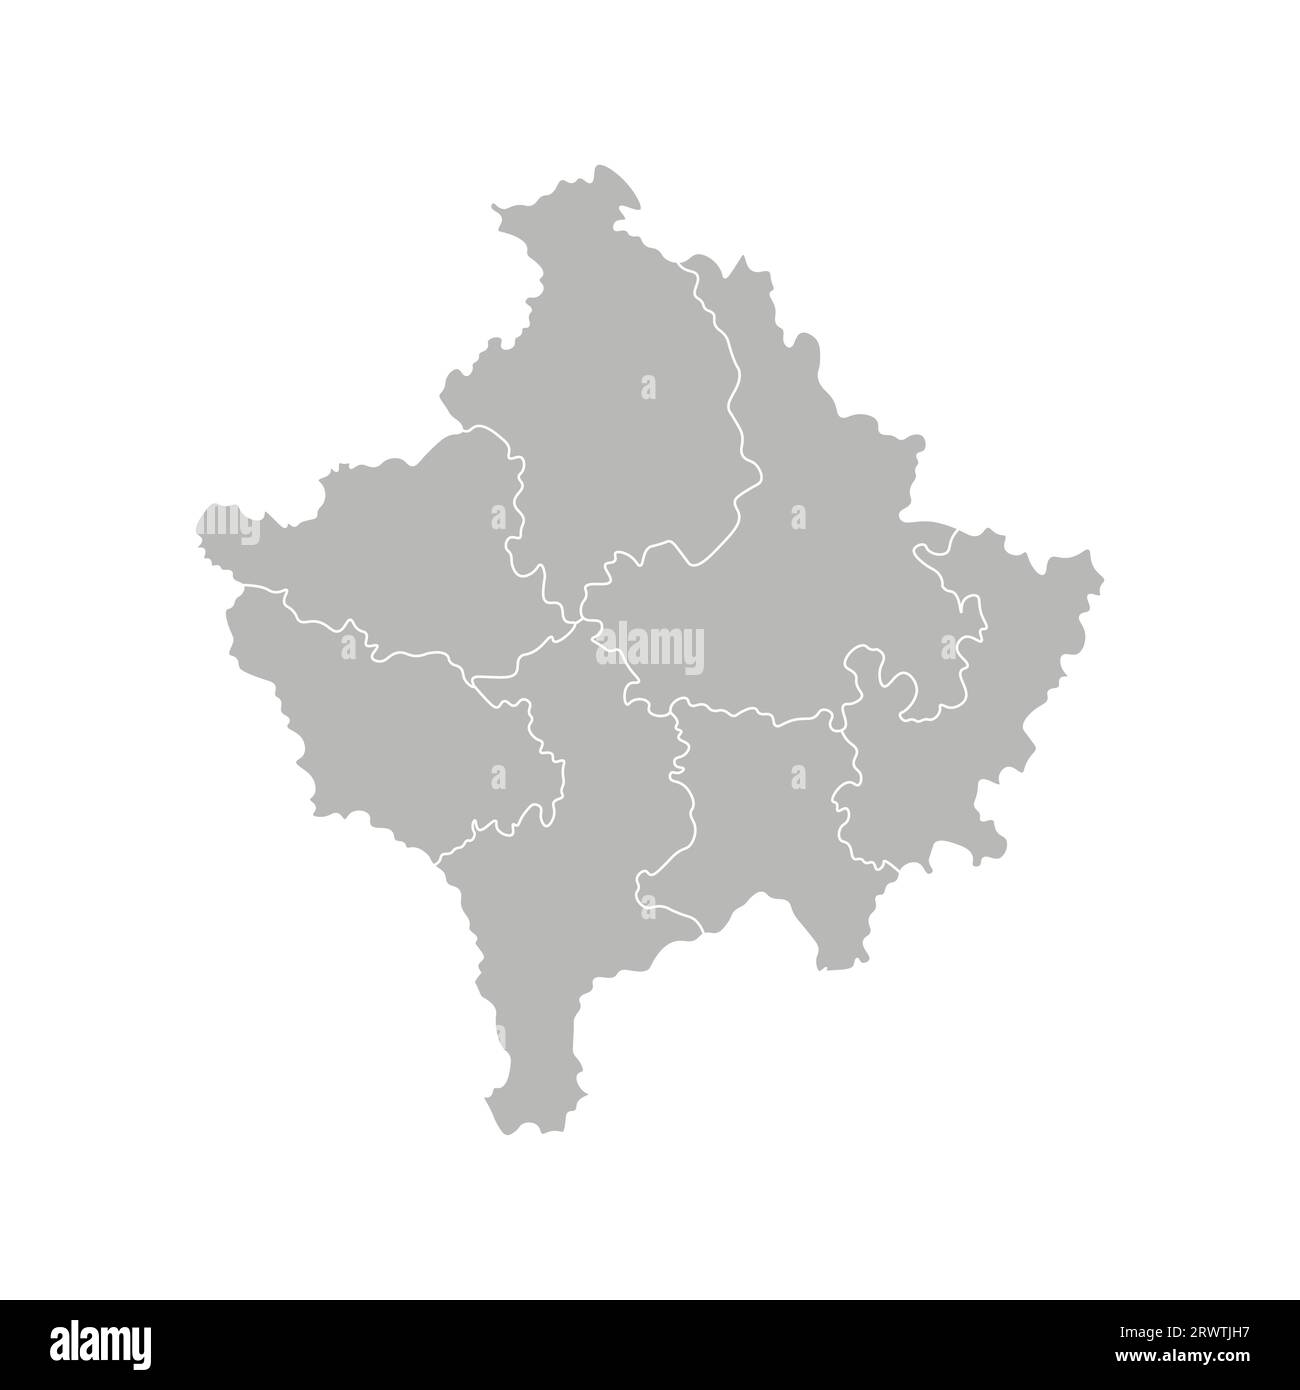 Vector isolated illustration of simplified administrative map of Kosovo. Borders of the districts. Grey silhouettes. White outline. Stock Vector